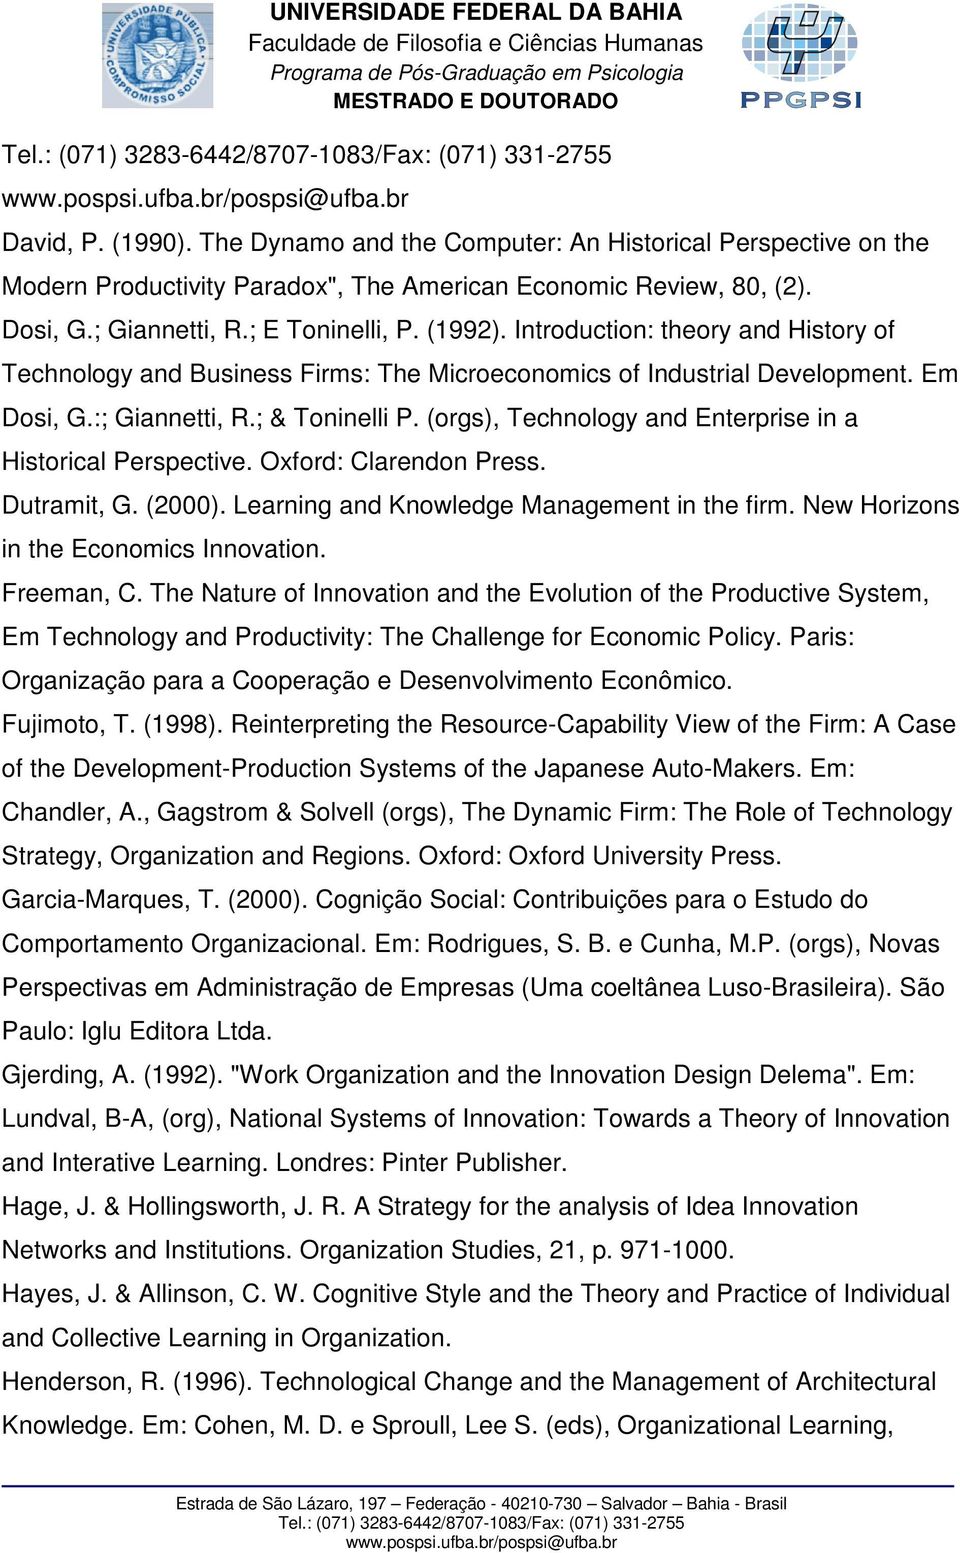 (orgs), Technology and Enterprise in a Historical Perspective. Oxford: Clarendon Press. Dutramit, G. (2000). Learning and Knowledge Management in the firm. New Horizons in the Economics Innovation.